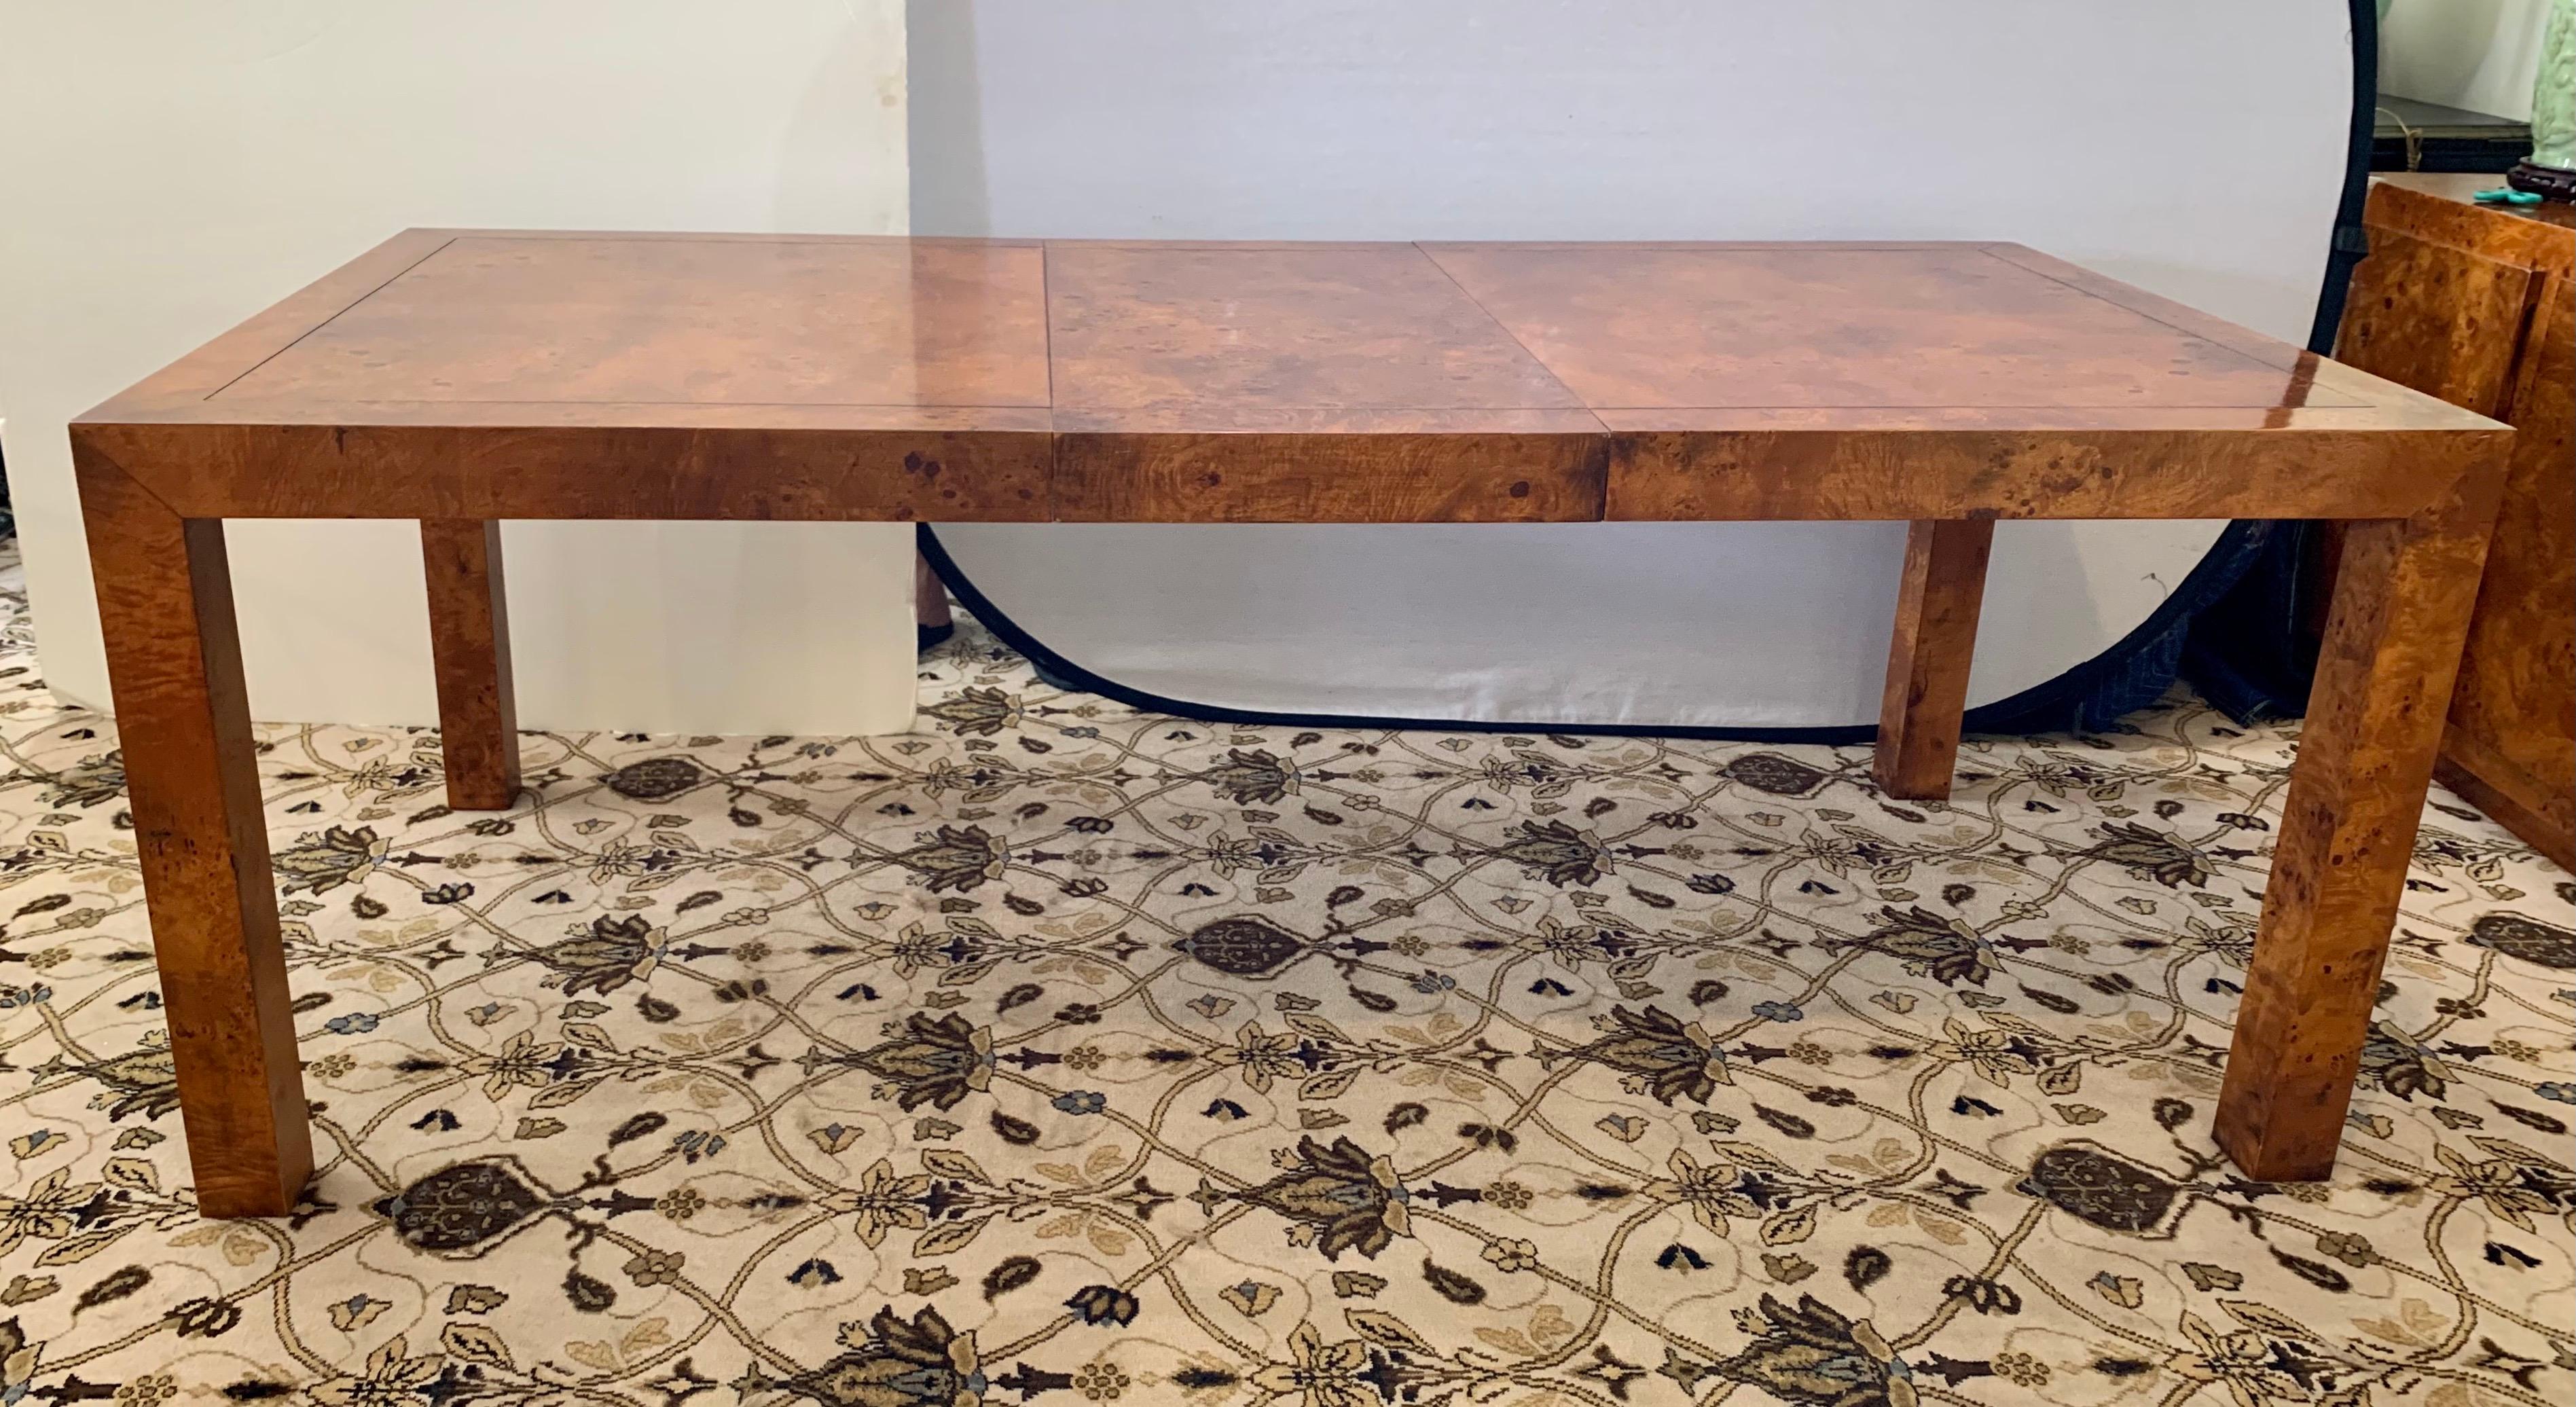 Spectacular signed vintage Parsons style extension dining or conference table with two leaves and gorgeous burlwood veneer. The table measures 60